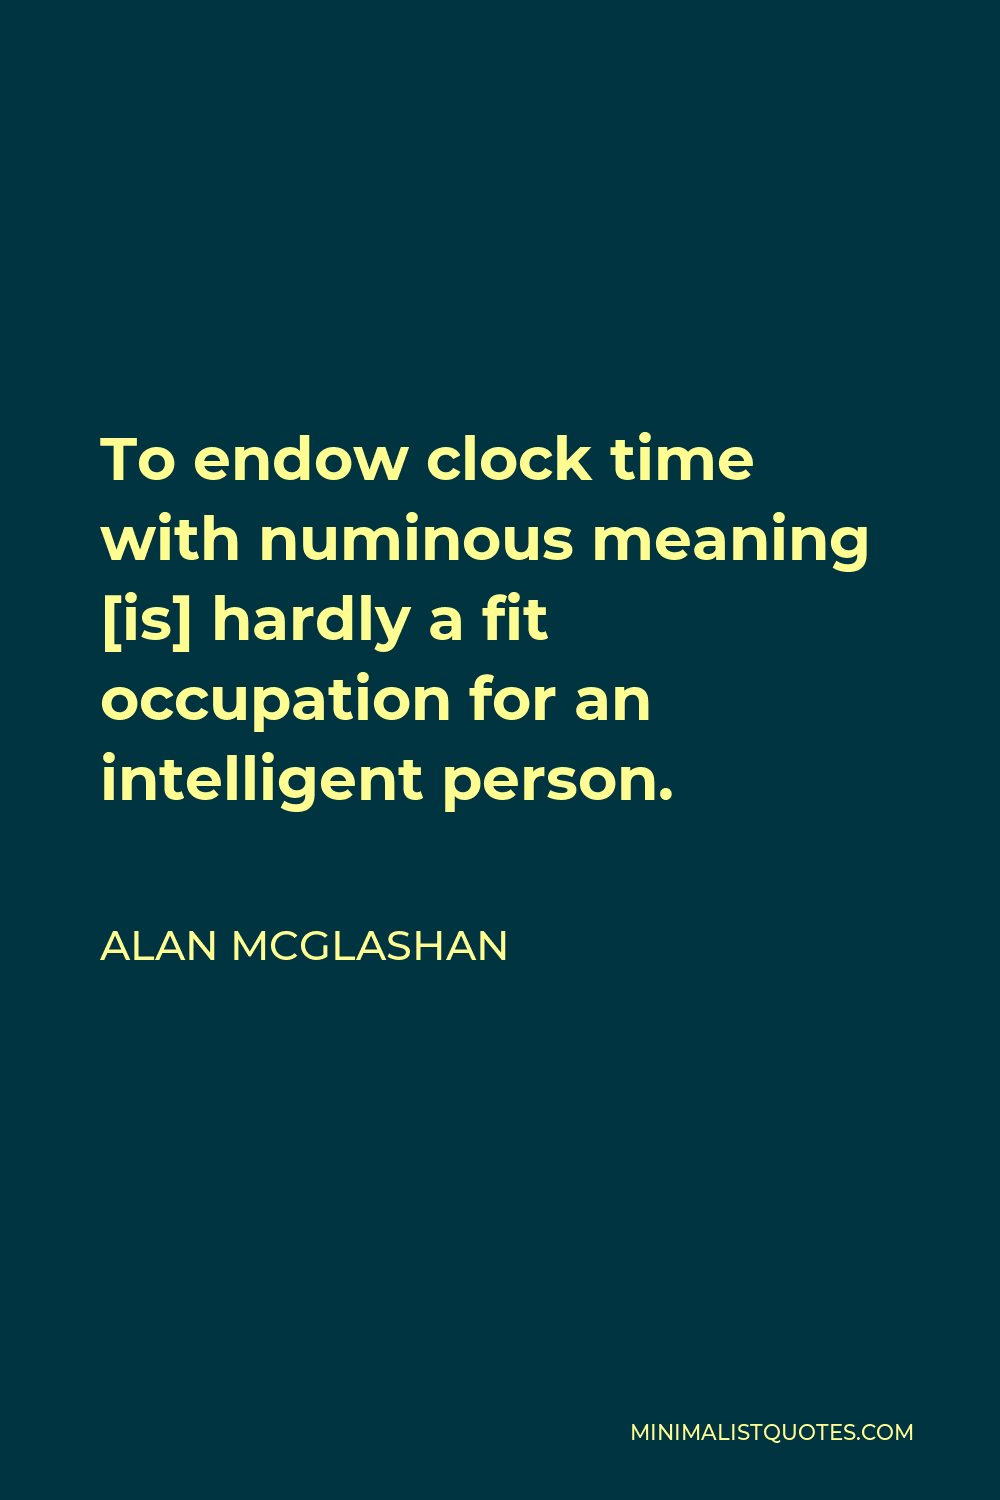 Alan McGlashan Quote - To endow clock time with numinous meaning [is] hardly a fit occupation for an intelligent person.